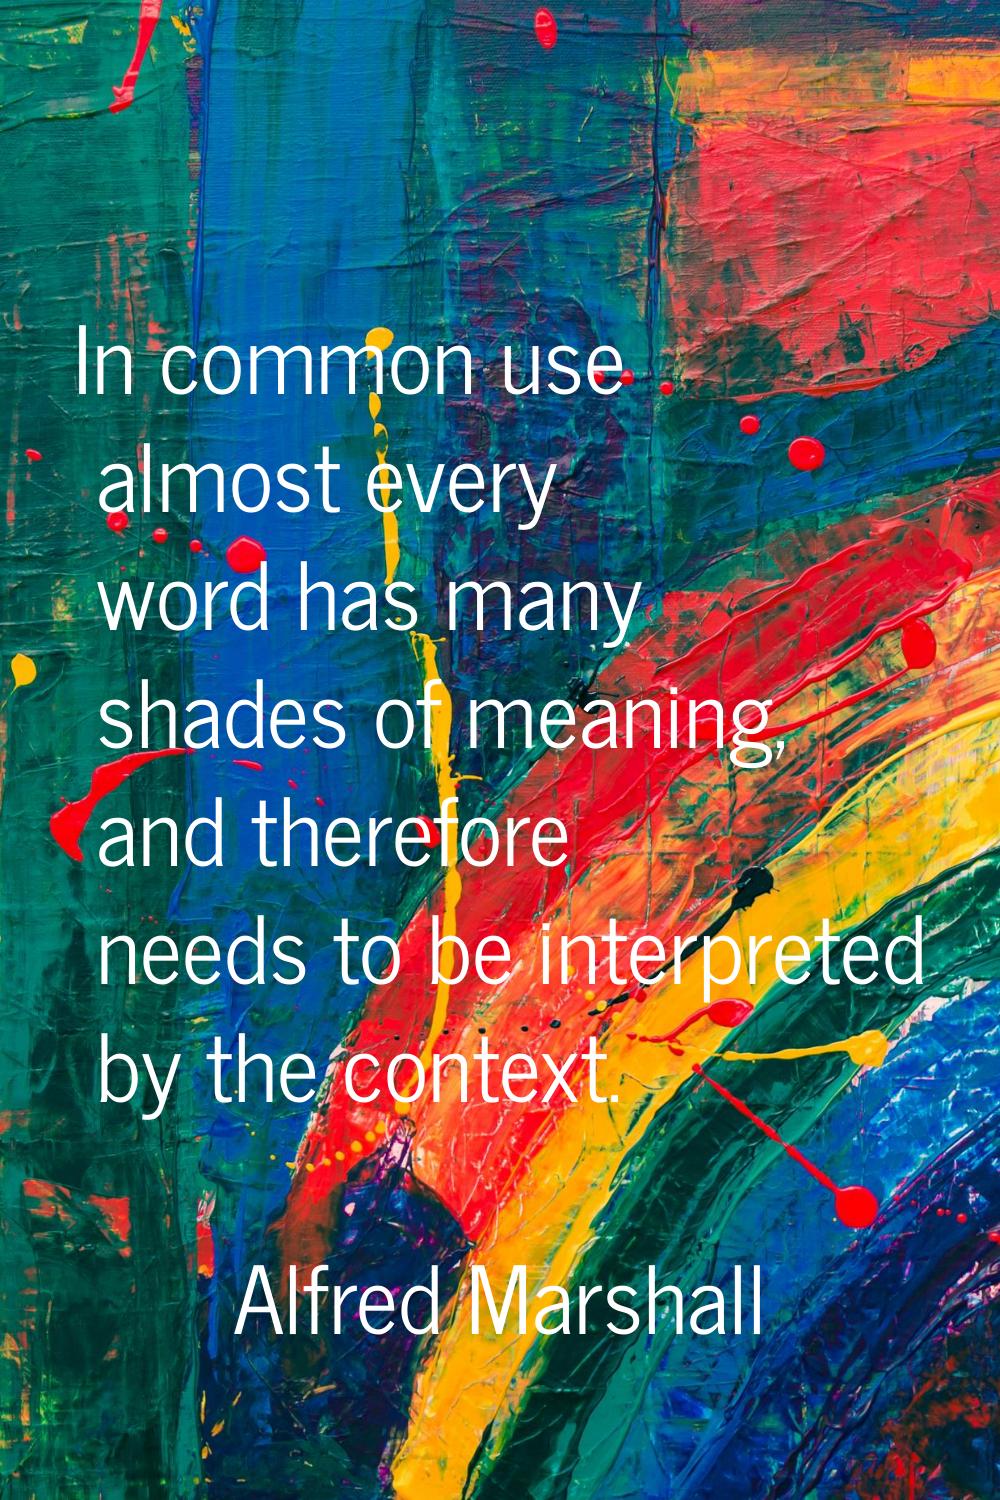 In common use almost every word has many shades of meaning, and therefore needs to be interpreted b